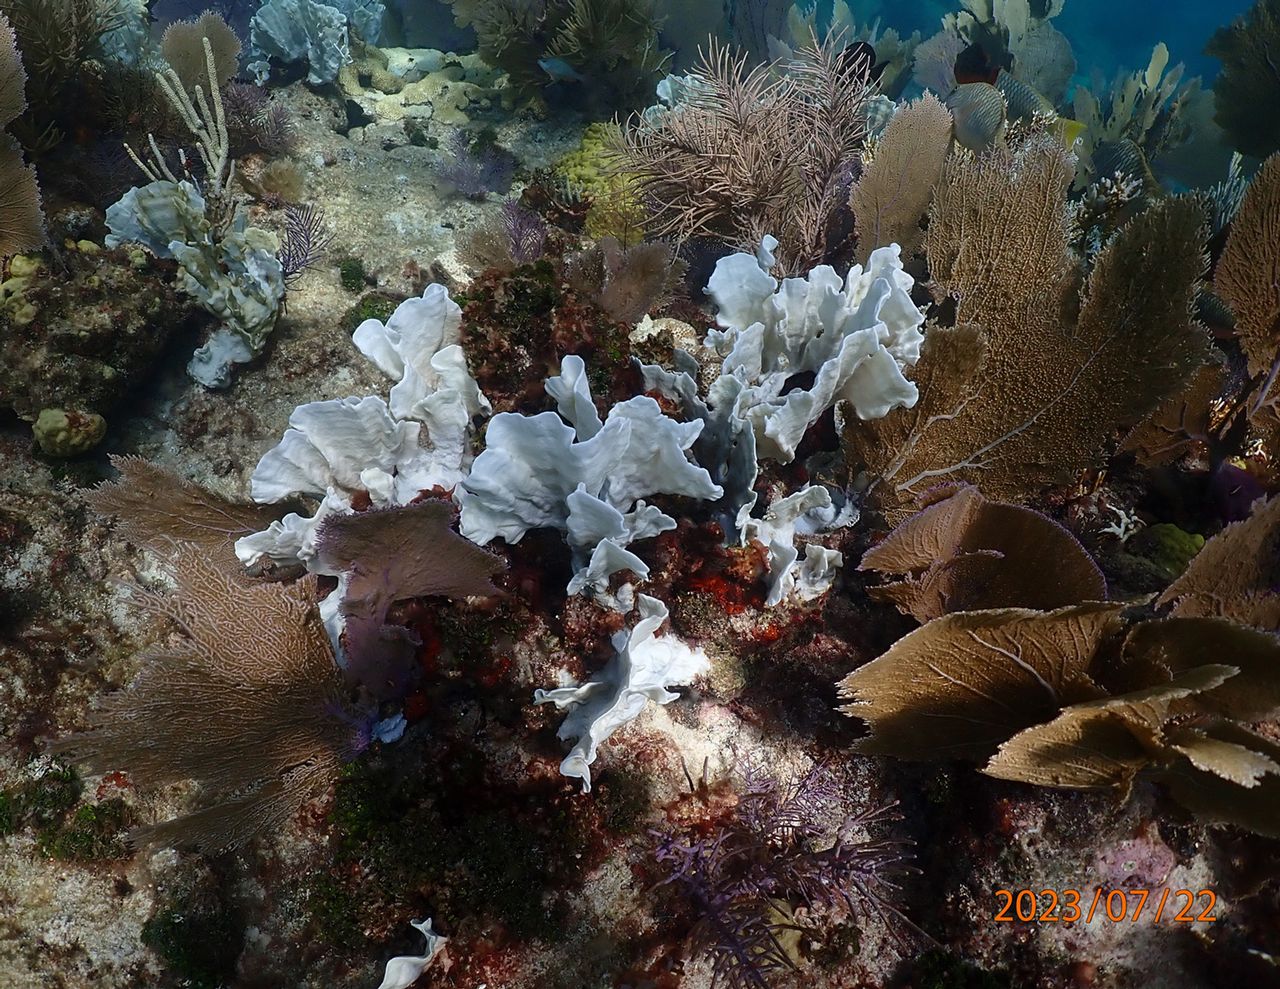 A recent photo of Grecian Rocks reef in Key Largo with some coral impacted by bleaching surrounded by unaffected corals. Photo: Ken Nedimyer/Reef Renewal USA